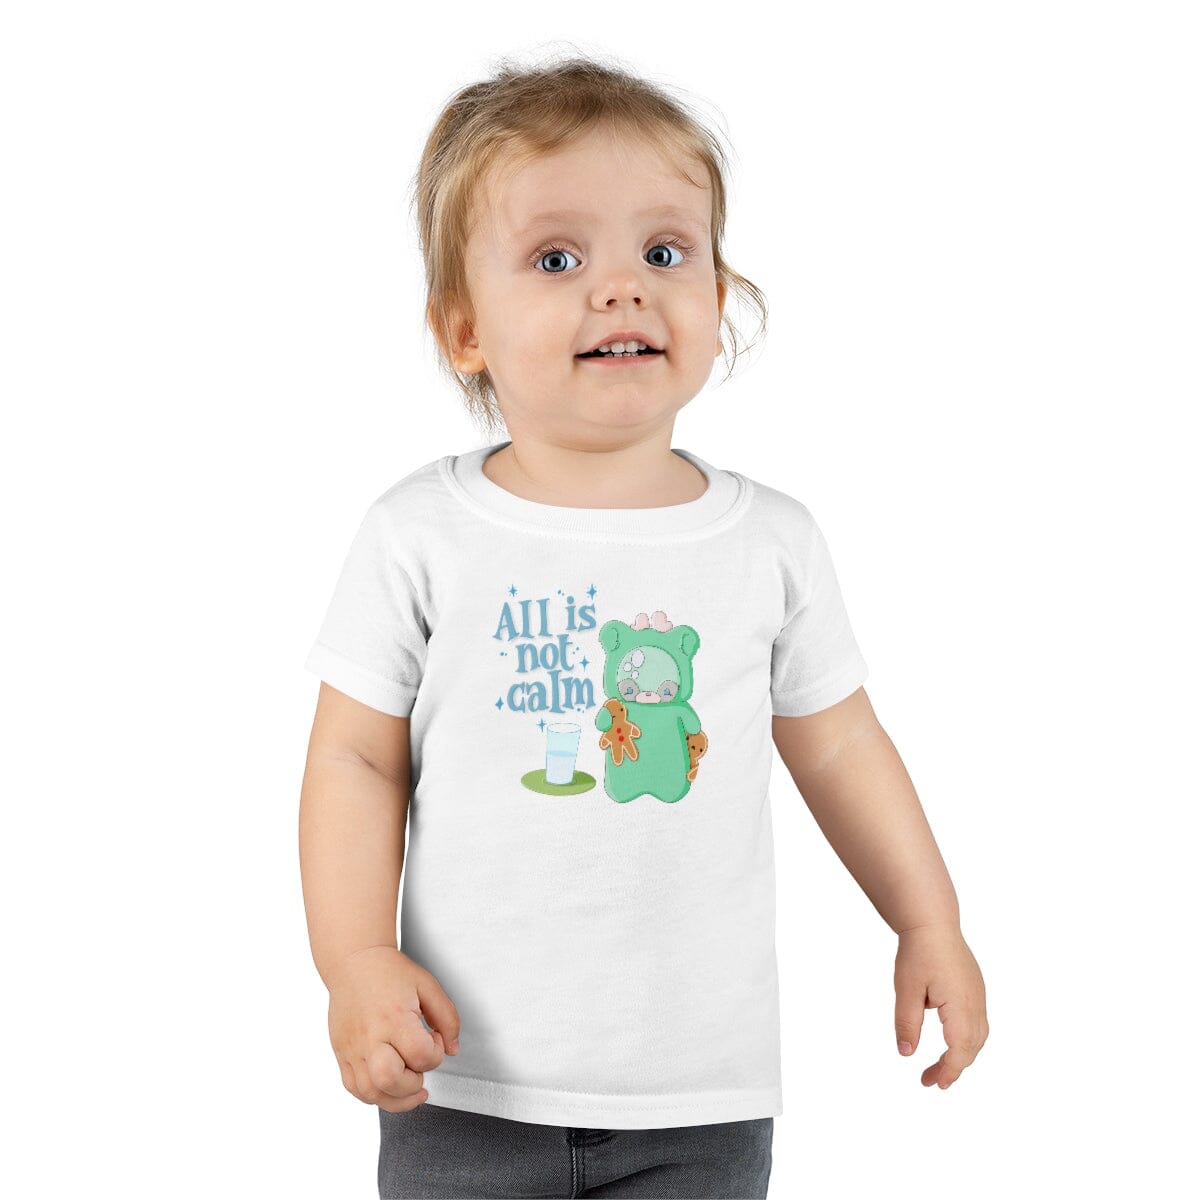 The Griswold Toddler T-shirt